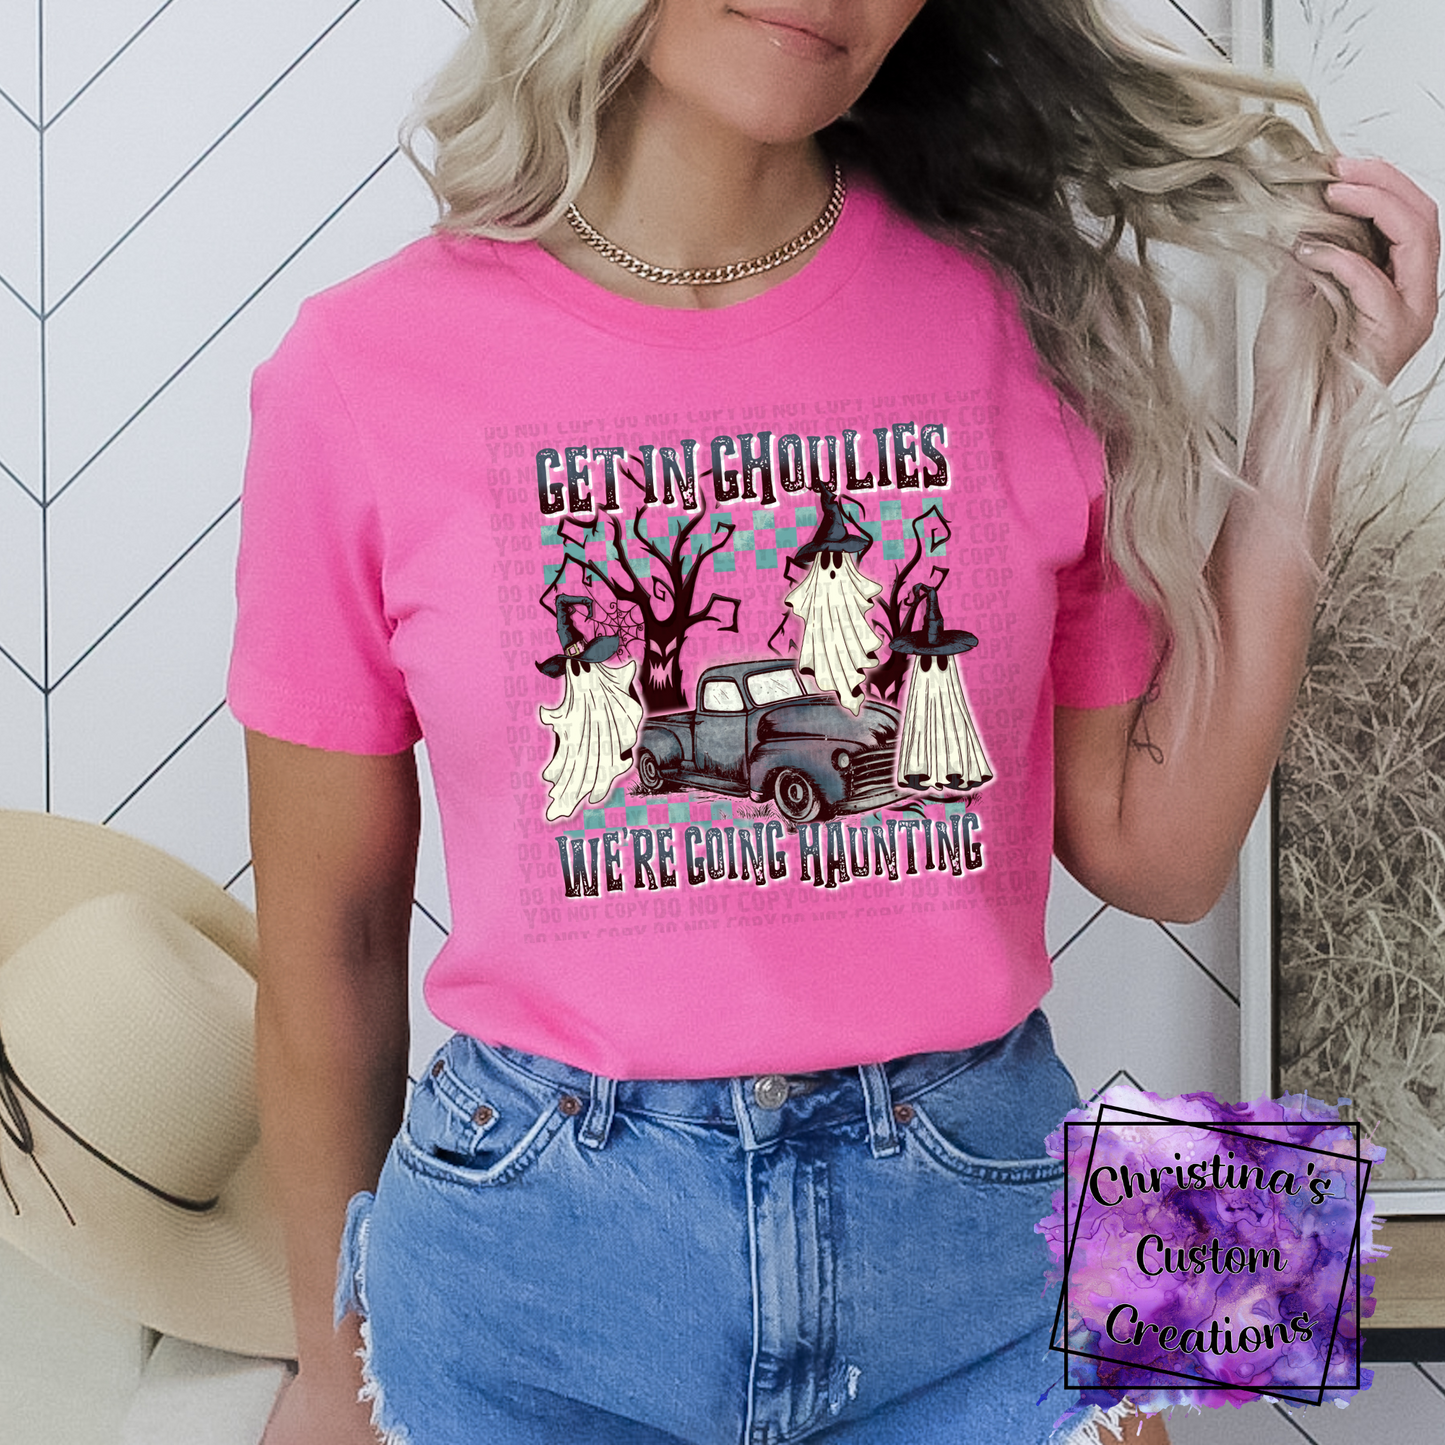 Get In Ghoulies Were Going Haunting T-Shirt | Trendy Halloween Shirt |Funny Halloween Shirt | Fast Shipping | Super Soft Shirts for Women